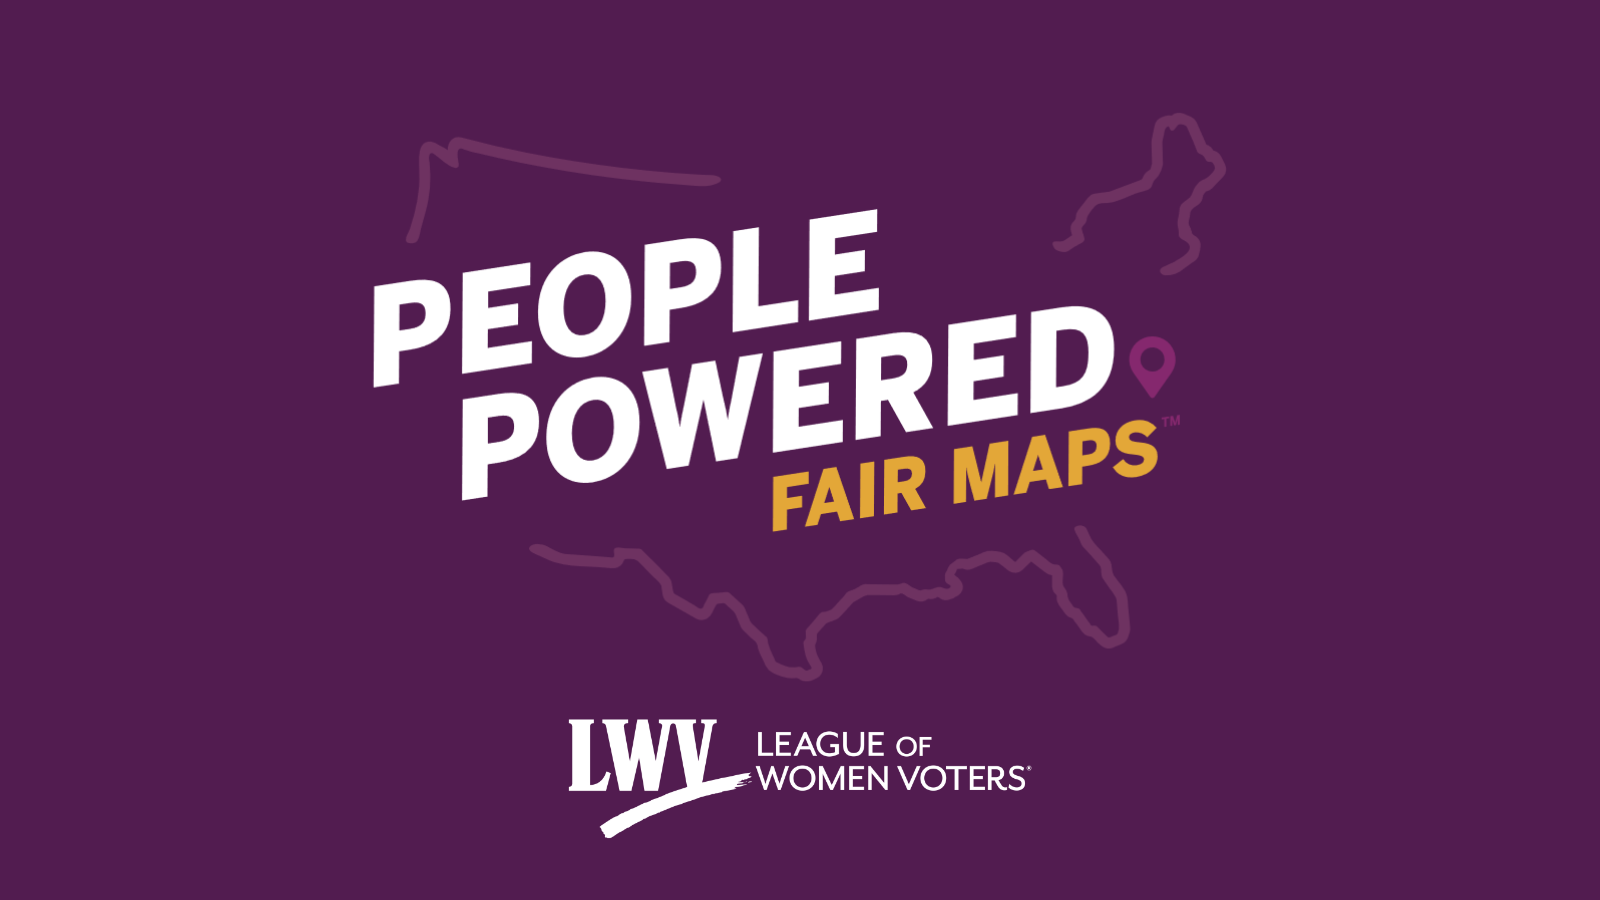 The People Powered Fair Maps logo above the LWV logo on a purple background